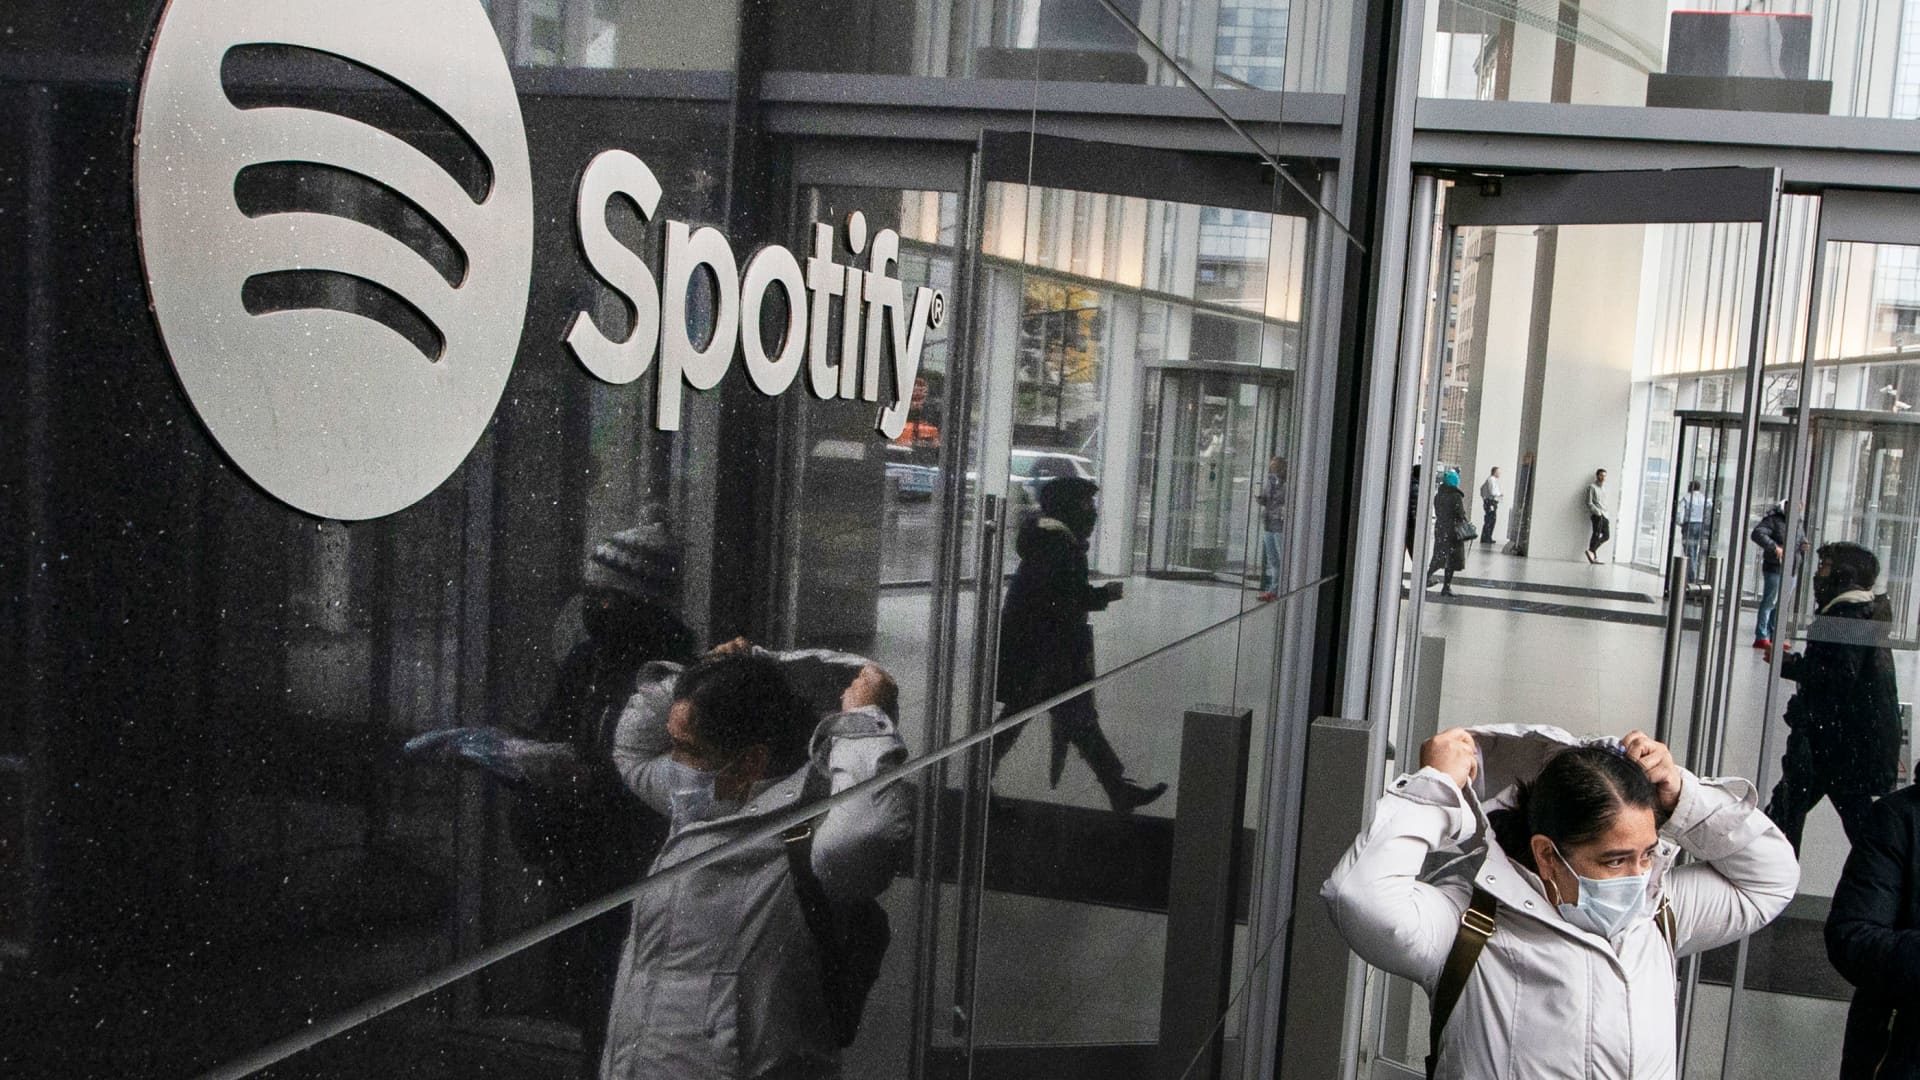 Spotify shares pop after earnings show strong user growth